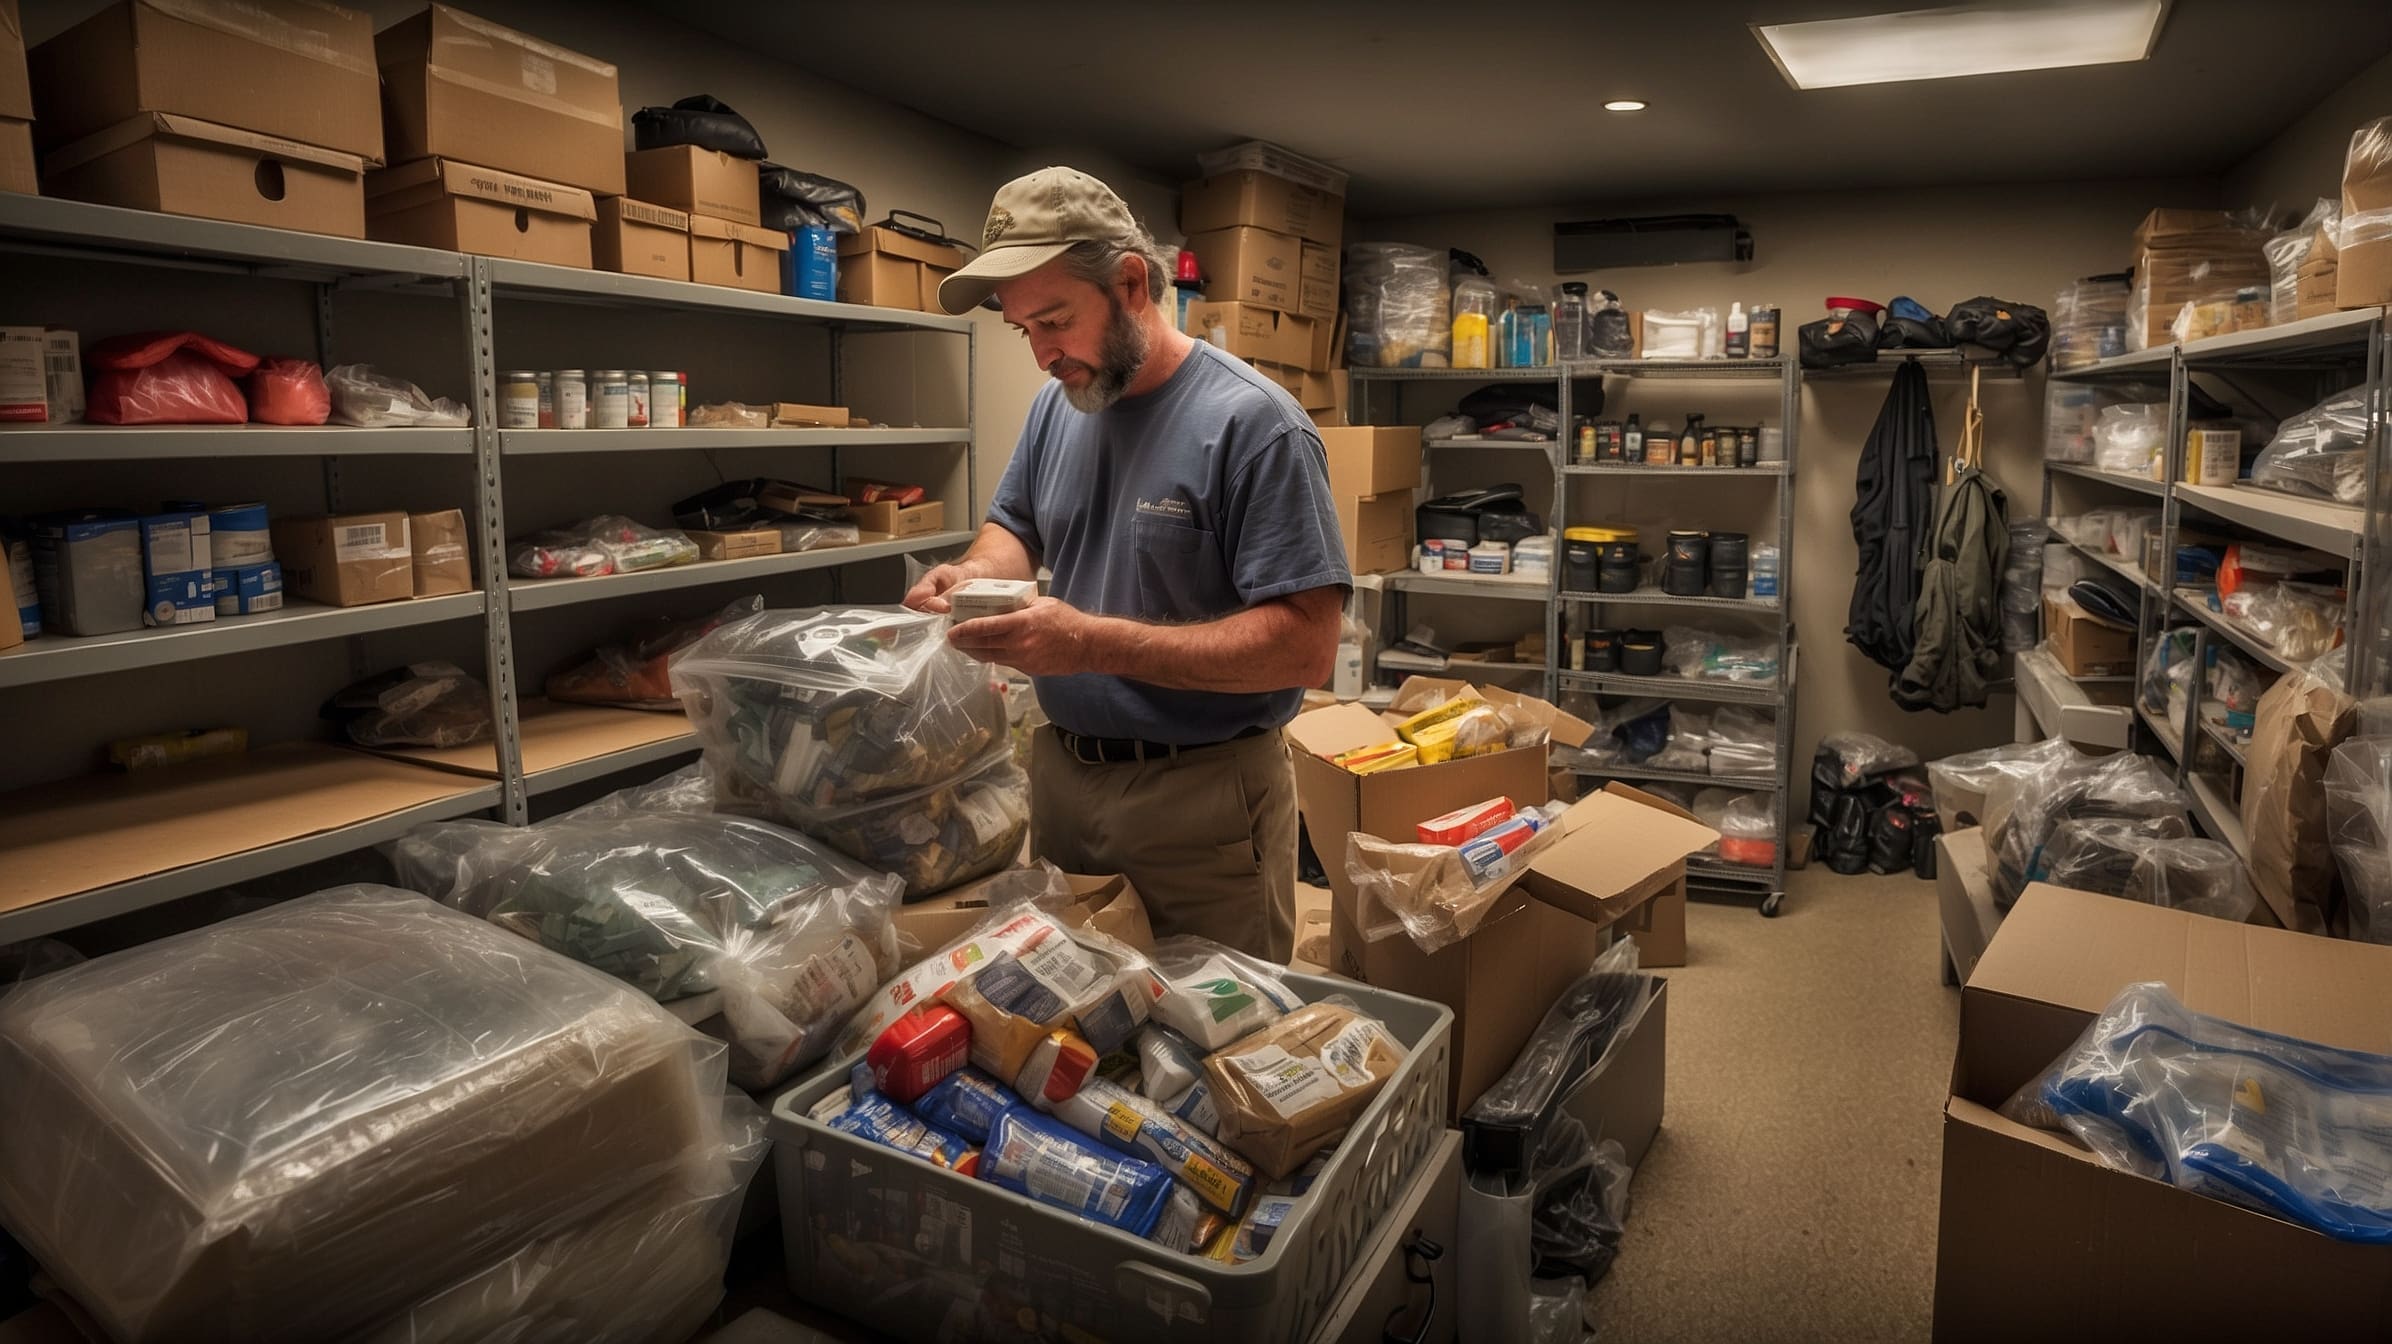 A man in a packed storage room inspects a package. Shelves around him are filled with various boxes, containers, and supplies, creating an extensive stockpile. He wears a blue shirt, khaki pants, and a cap.